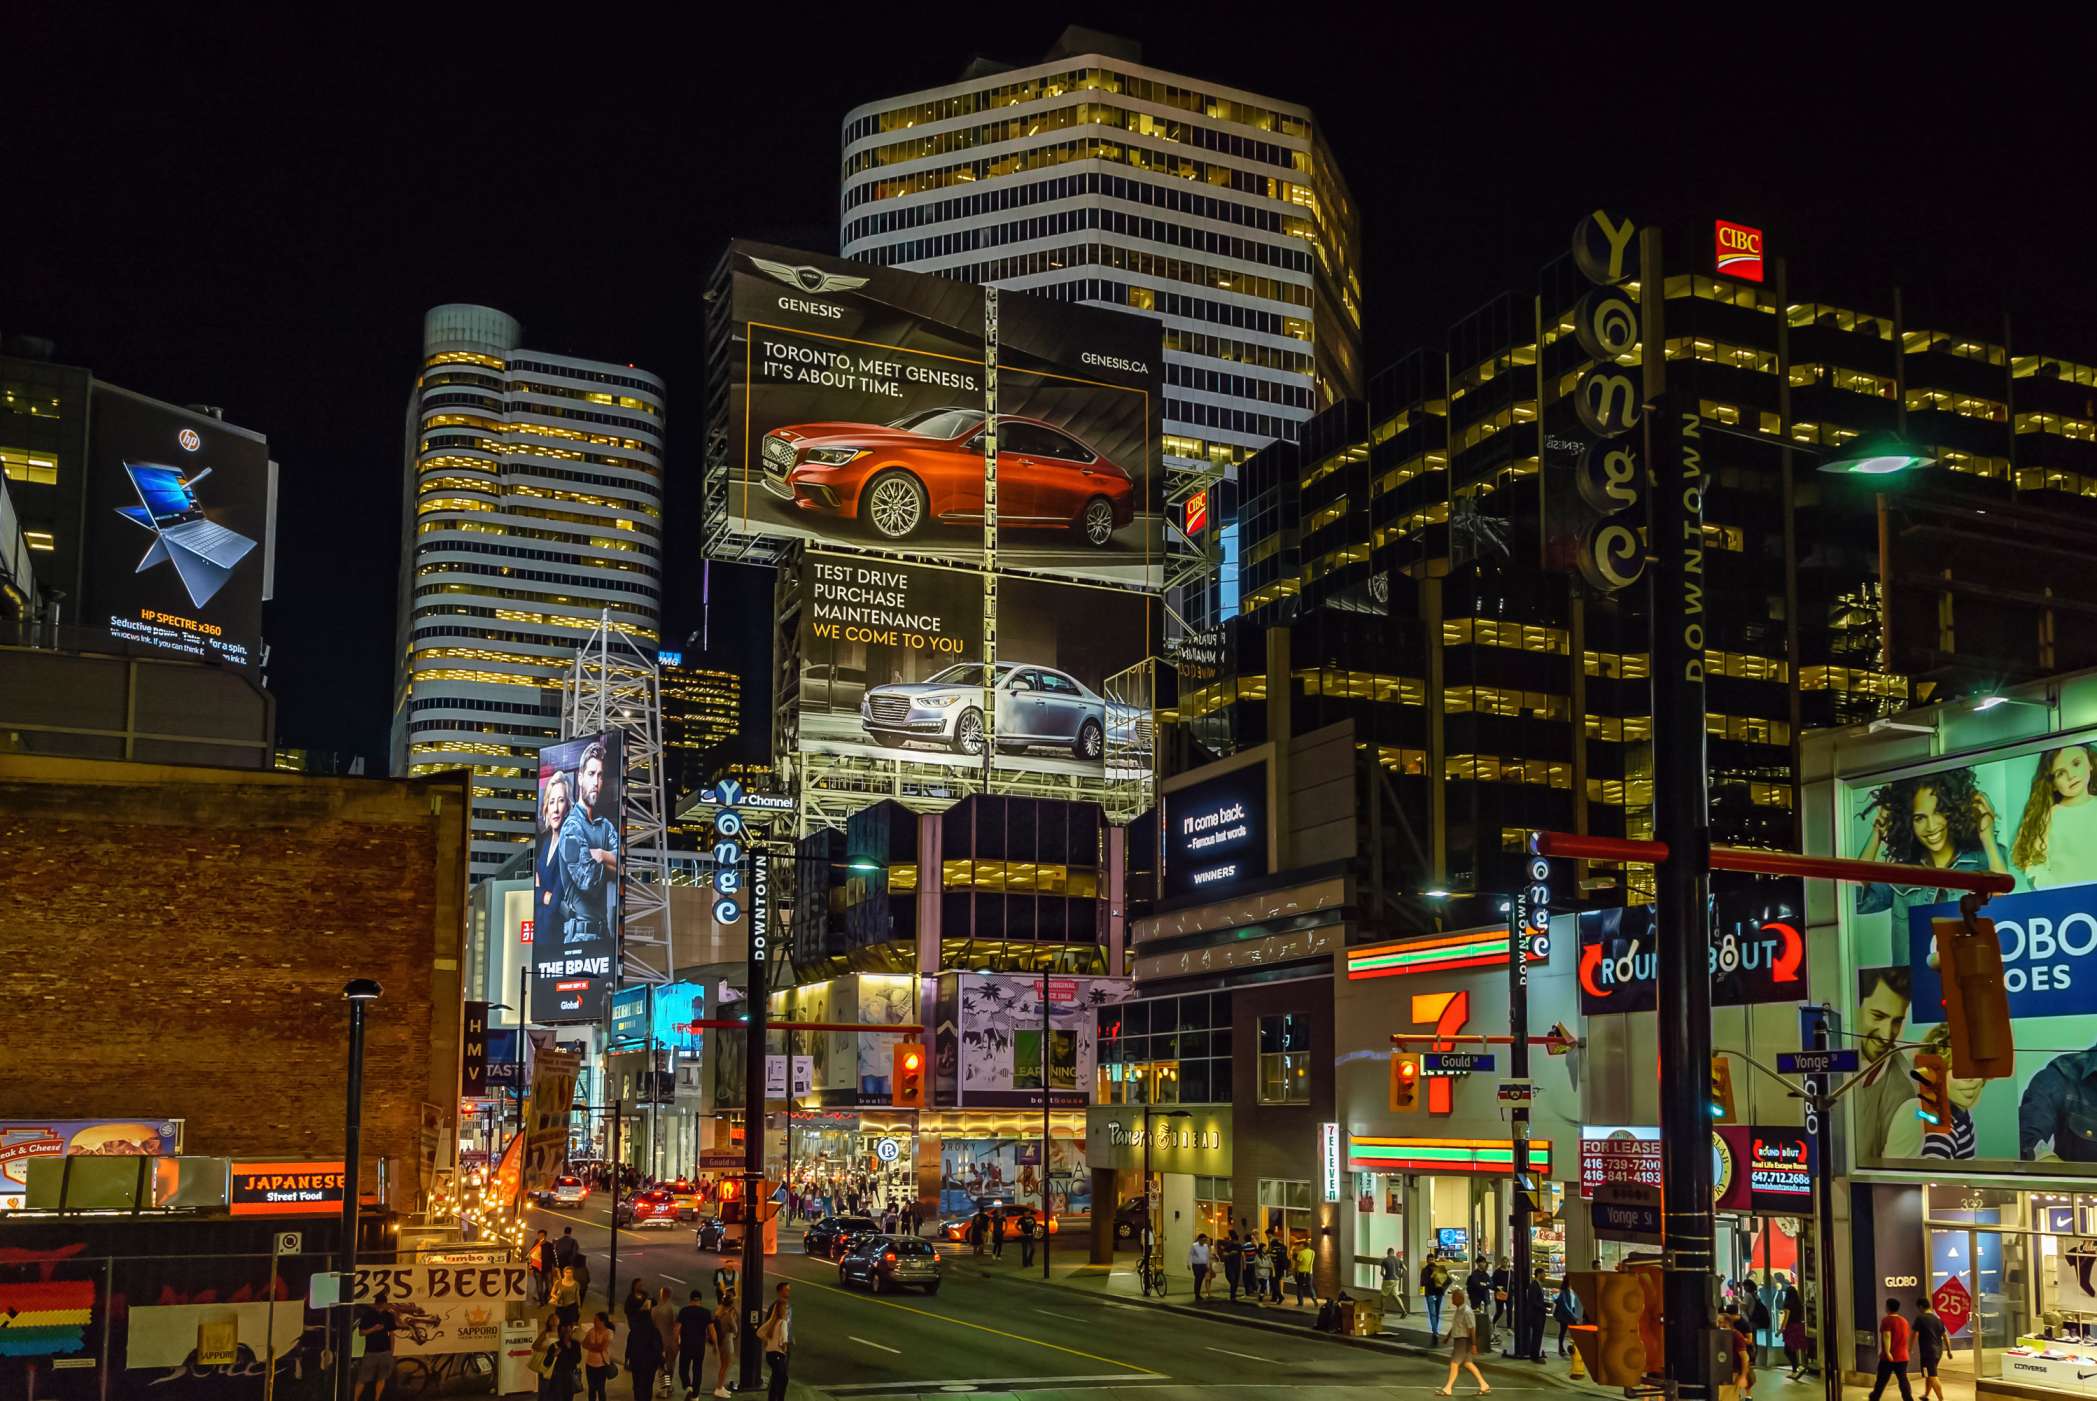 Street view of downtown Toronto after dark, with bright, illuminated billboards and signs.